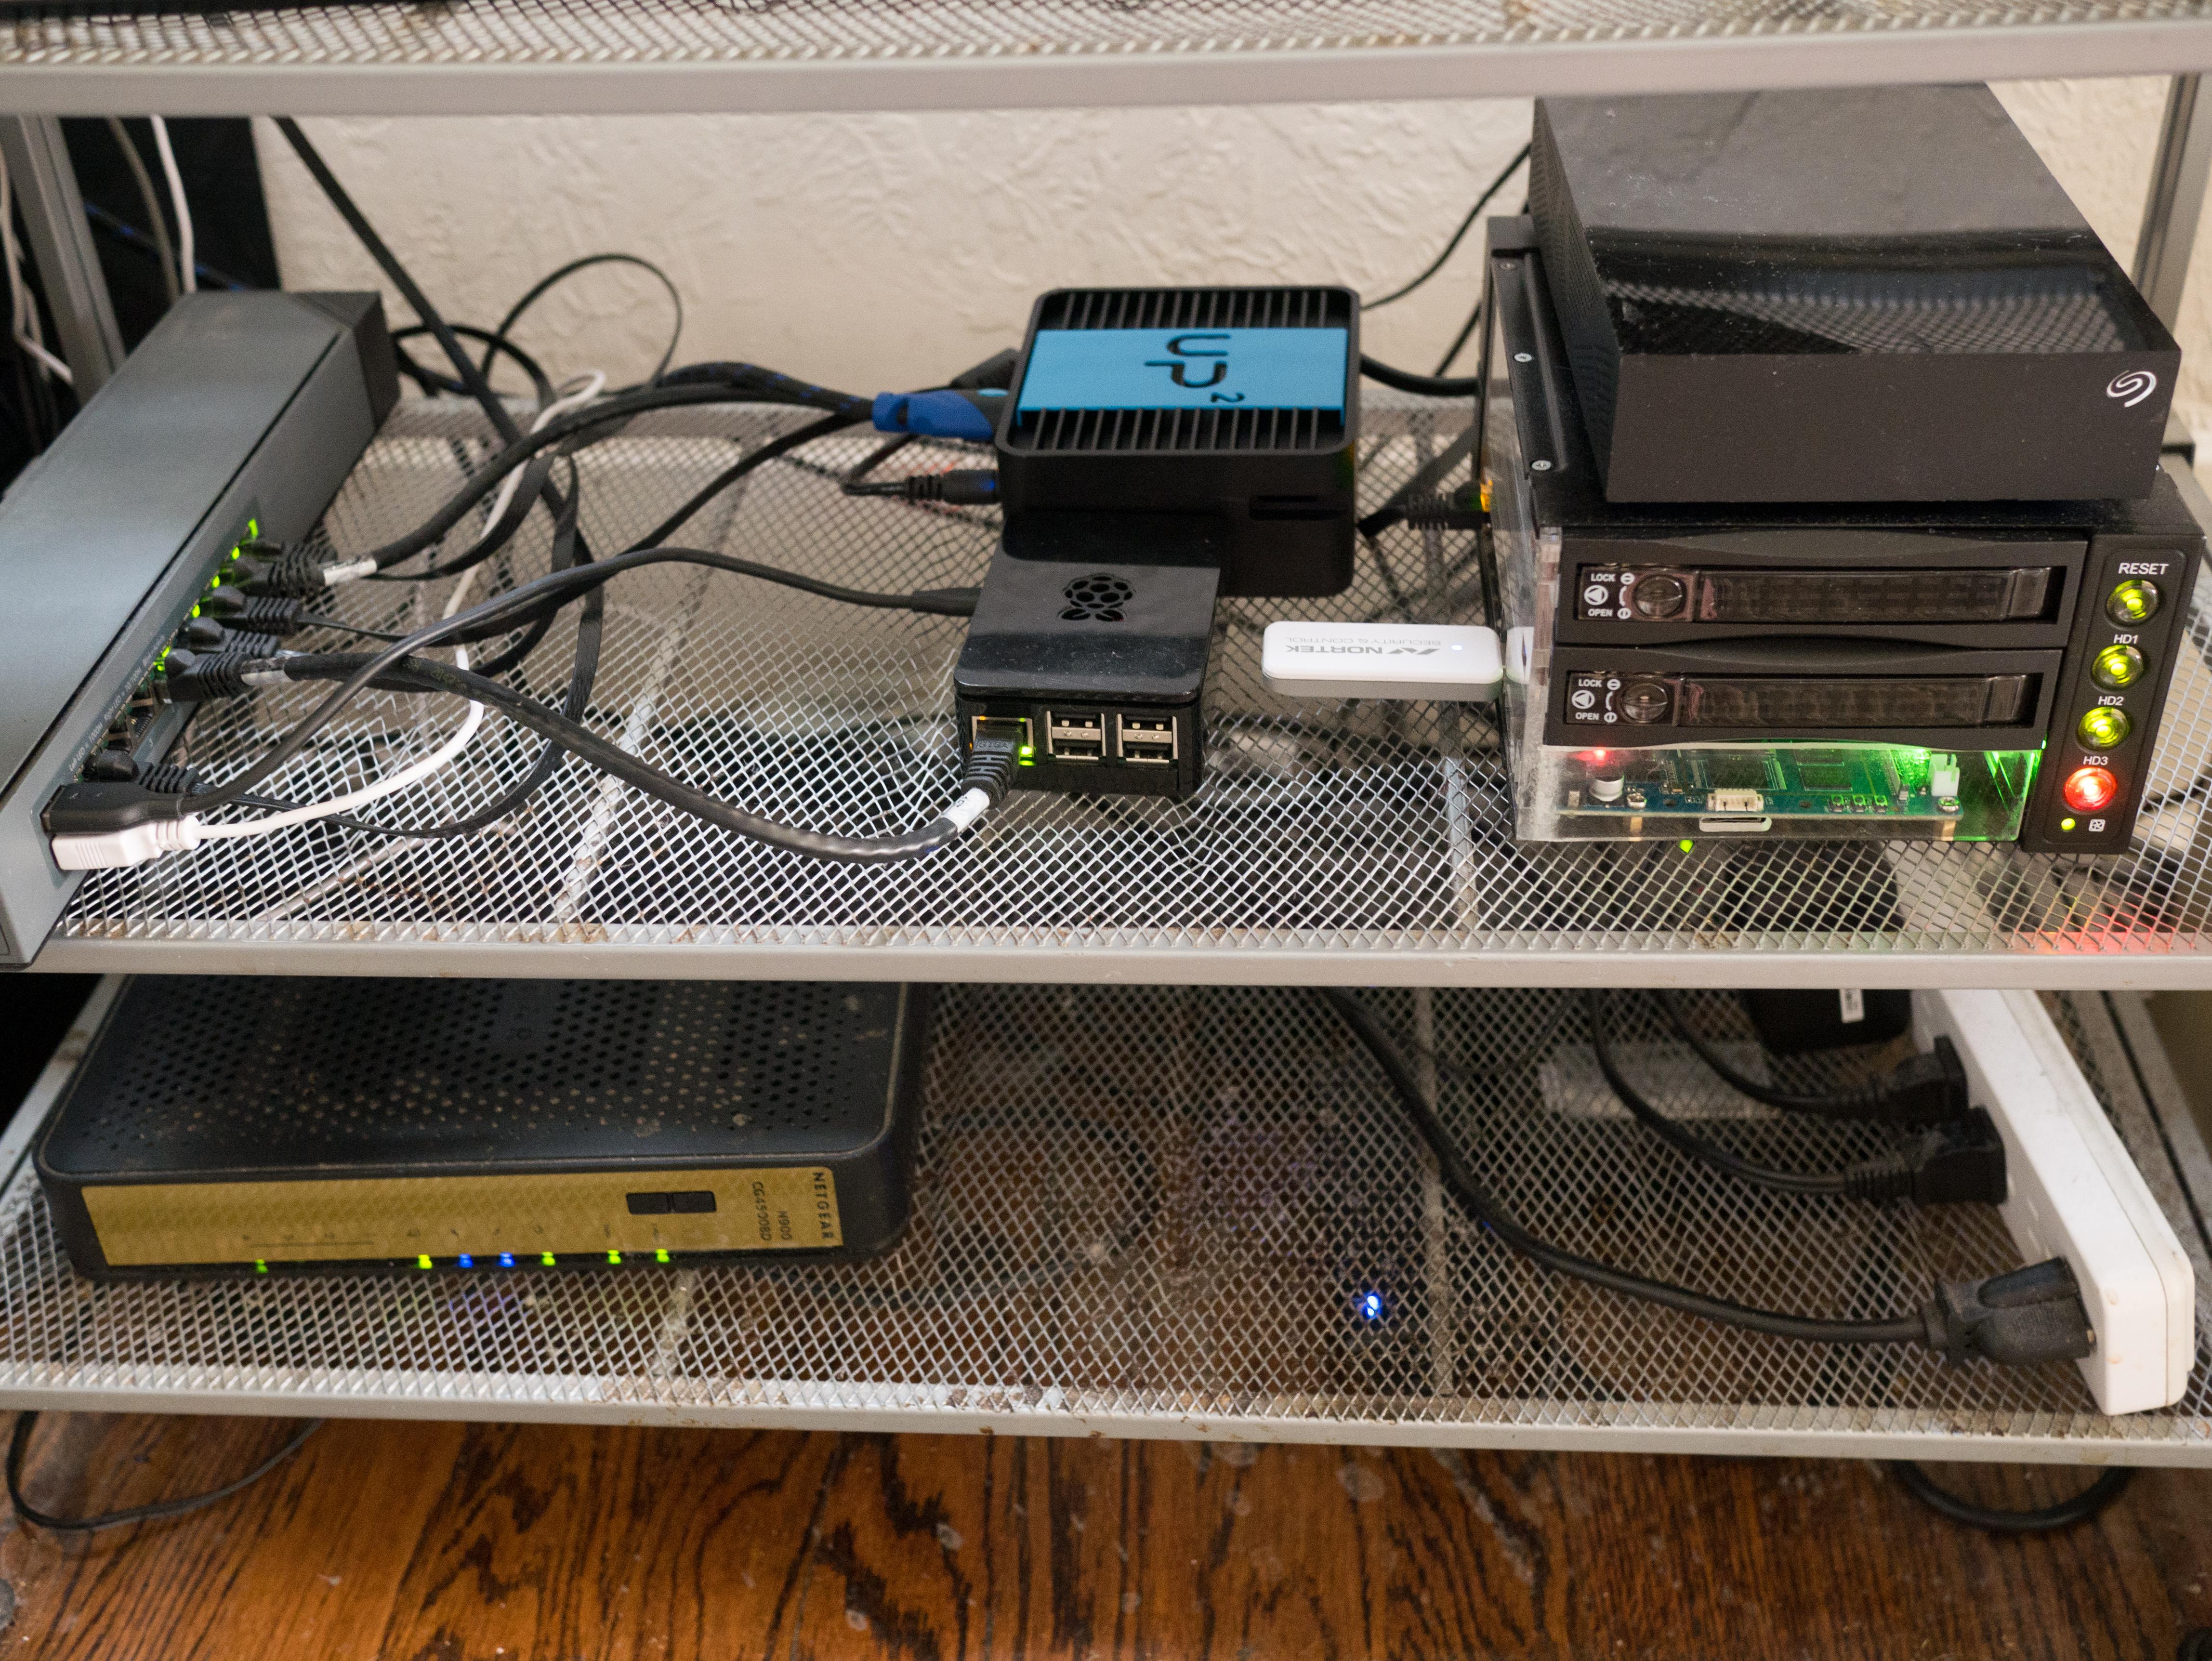 NAS and other home networking equipment on a wire shelf